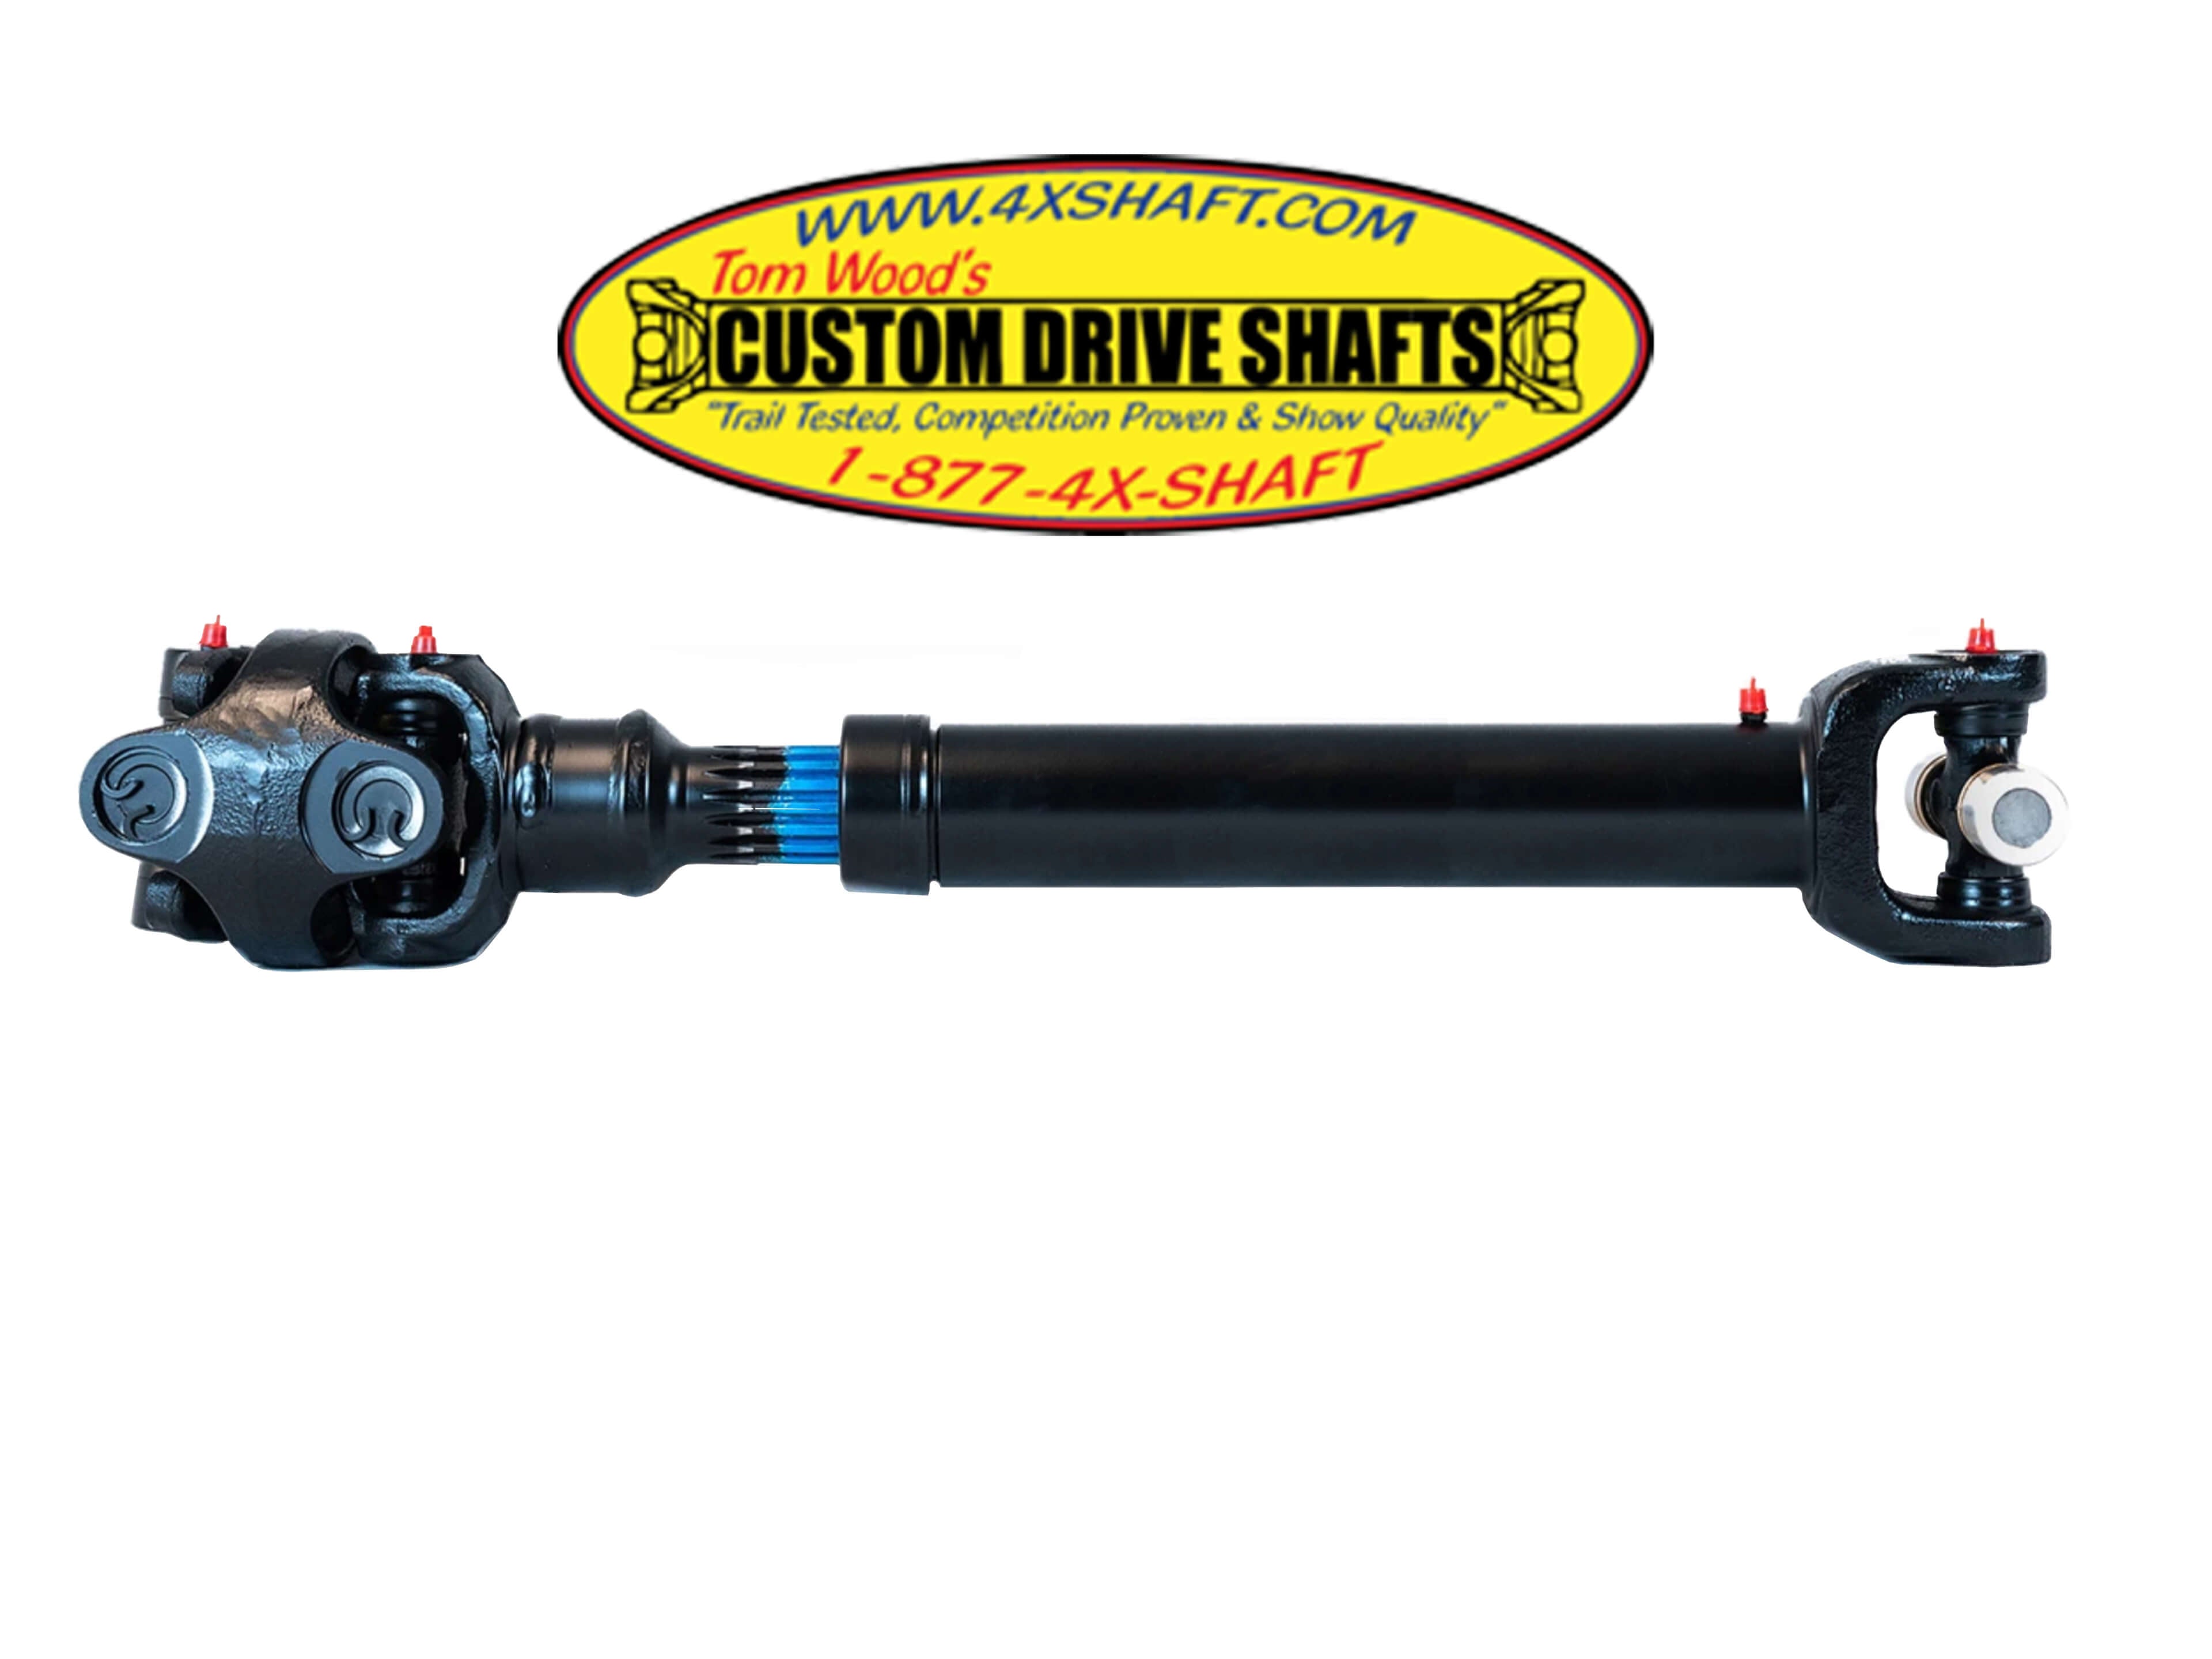 Tom Woods Custom Driveshafts – Rusty's Off-Road Products